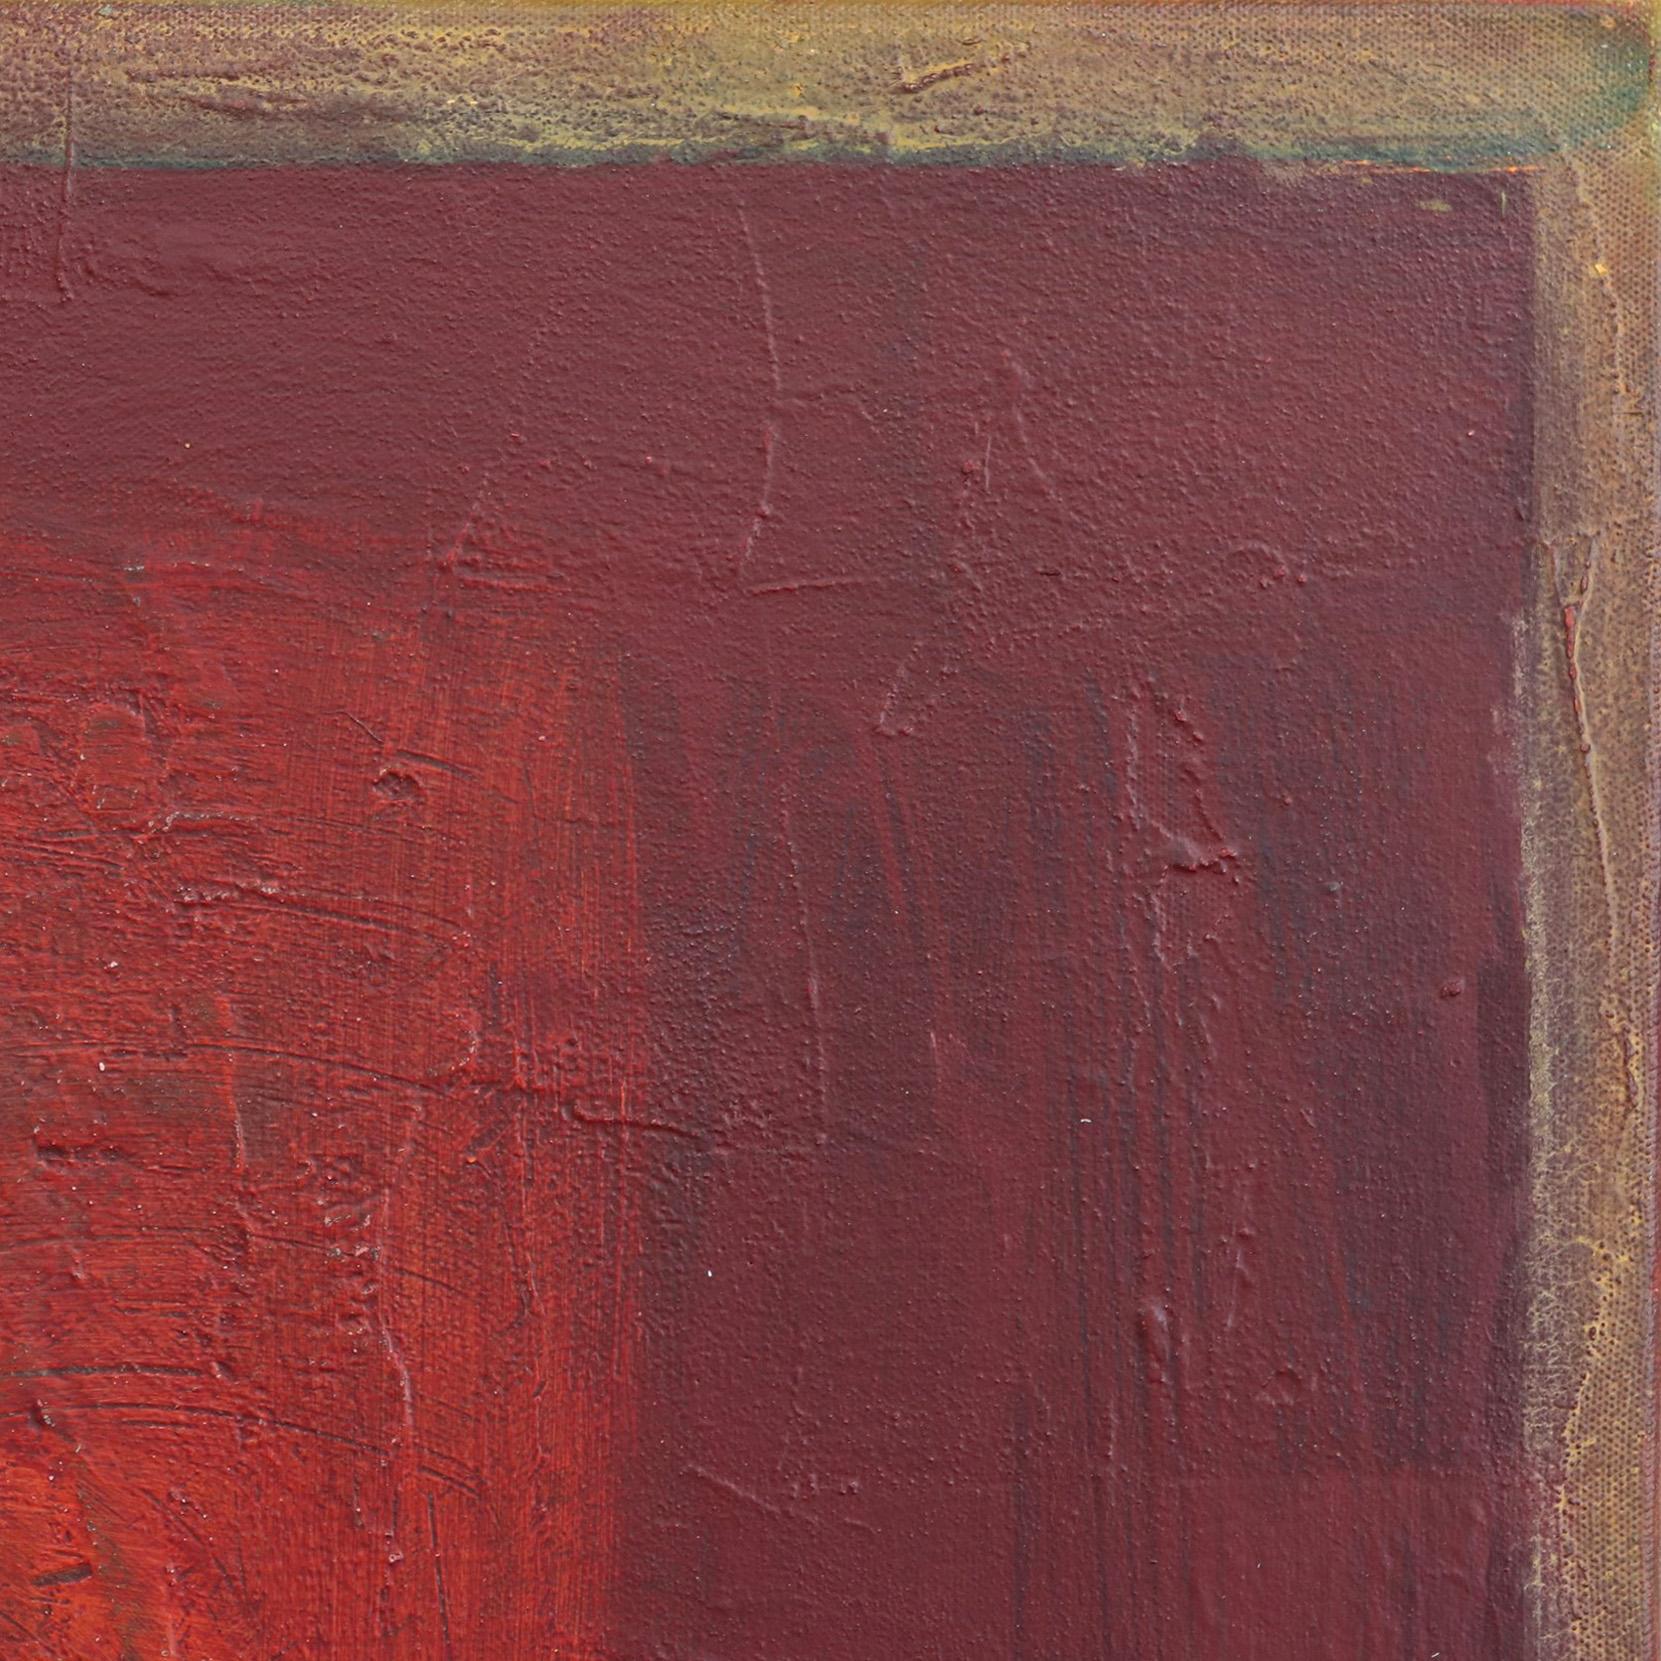 AWH 281 - Original Abstract Red Textured Expressionist Colorfield Oil Painting For Sale 2